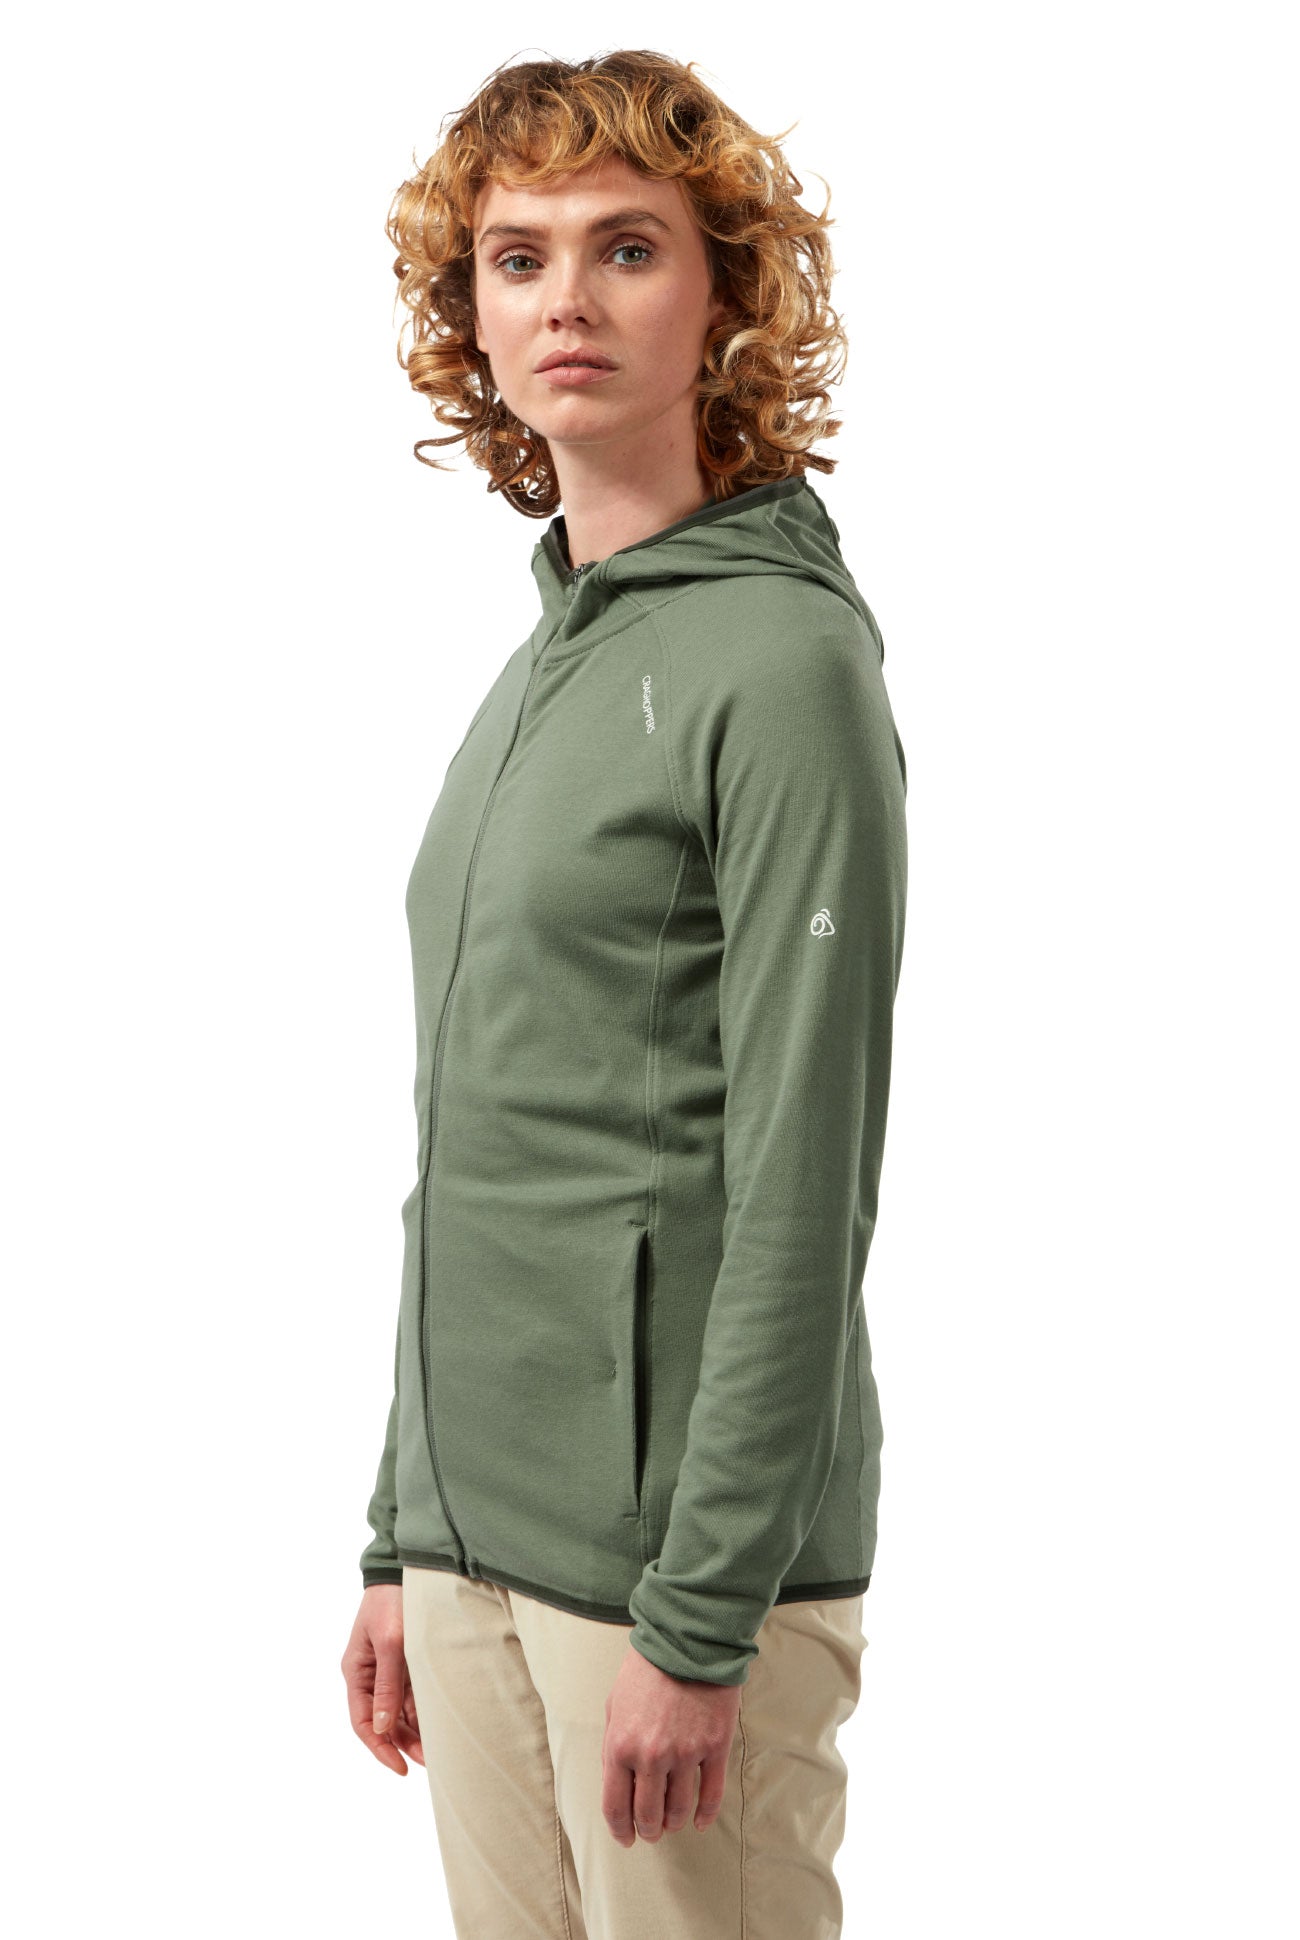 Craghoppers NosiLife Nilo Ladies Hooded Top - Hollands Country Clothing